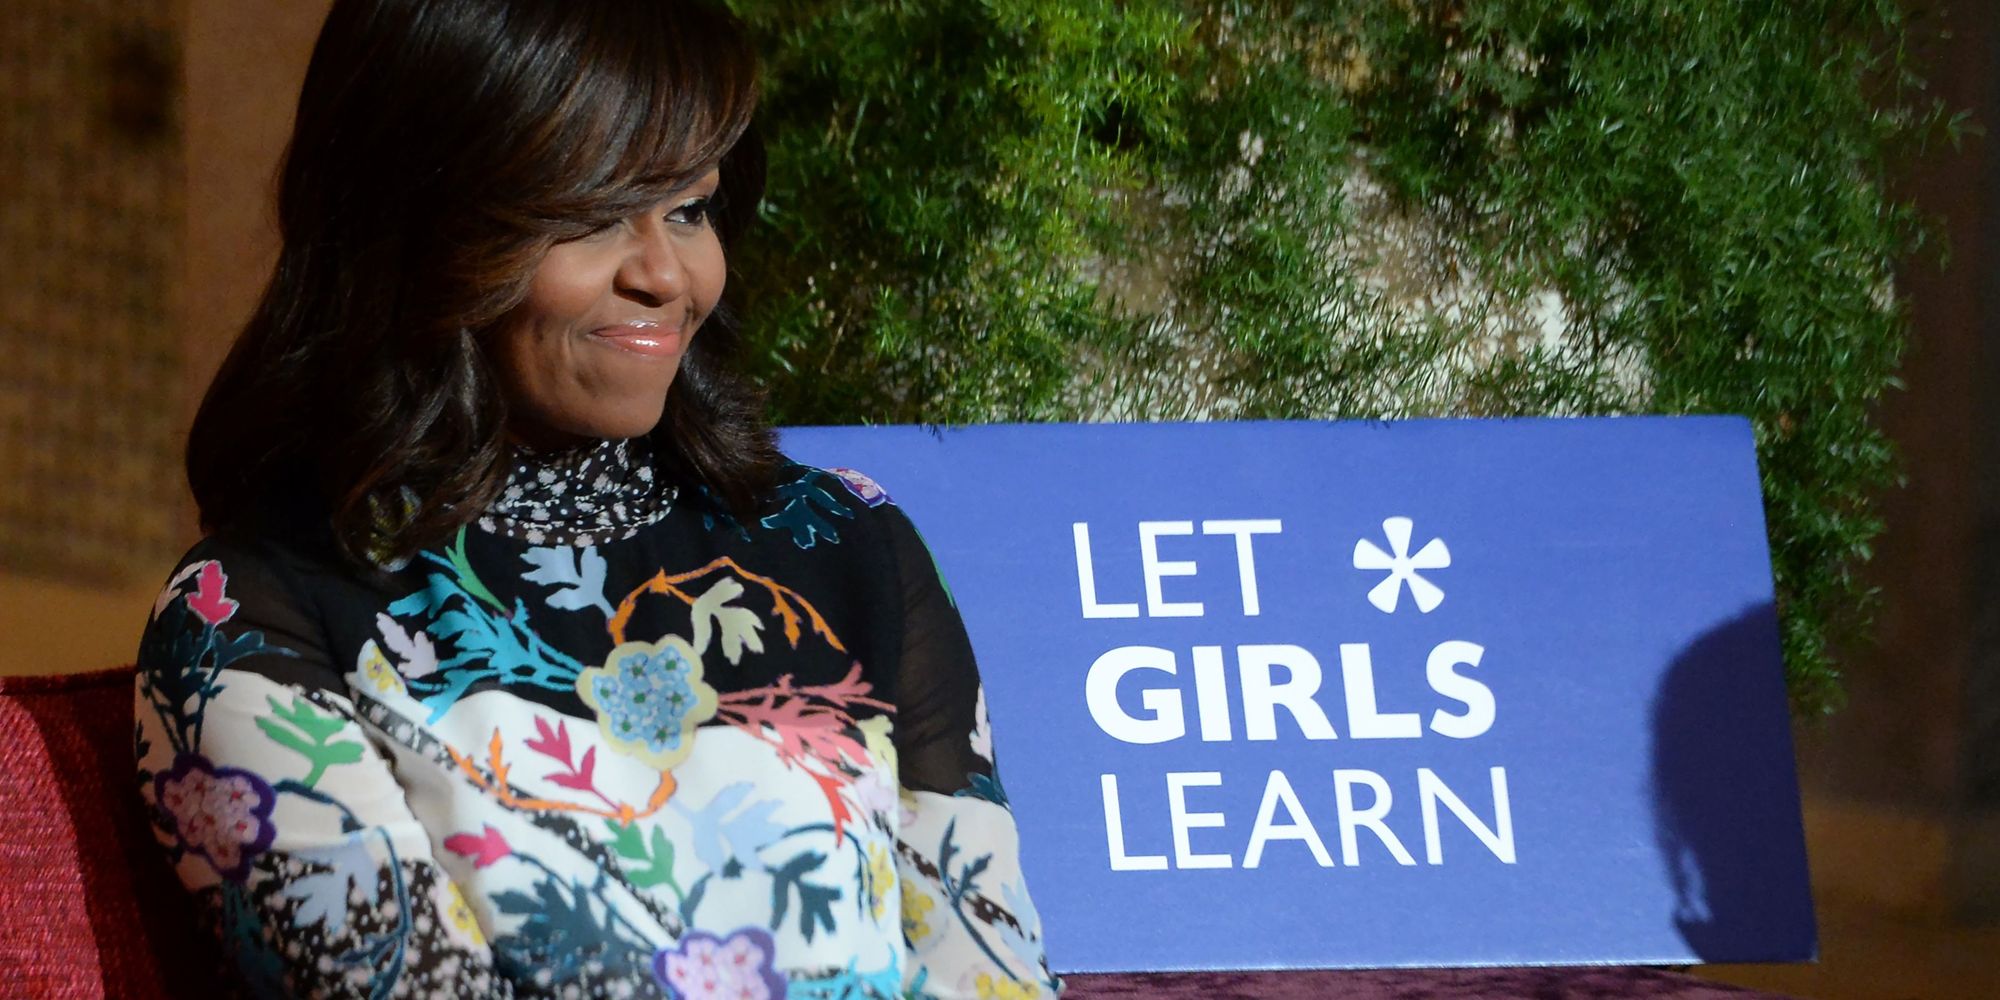 Michelle Obama Pledges $100 Million For Girls' Education In Morocco | The Huffington Post